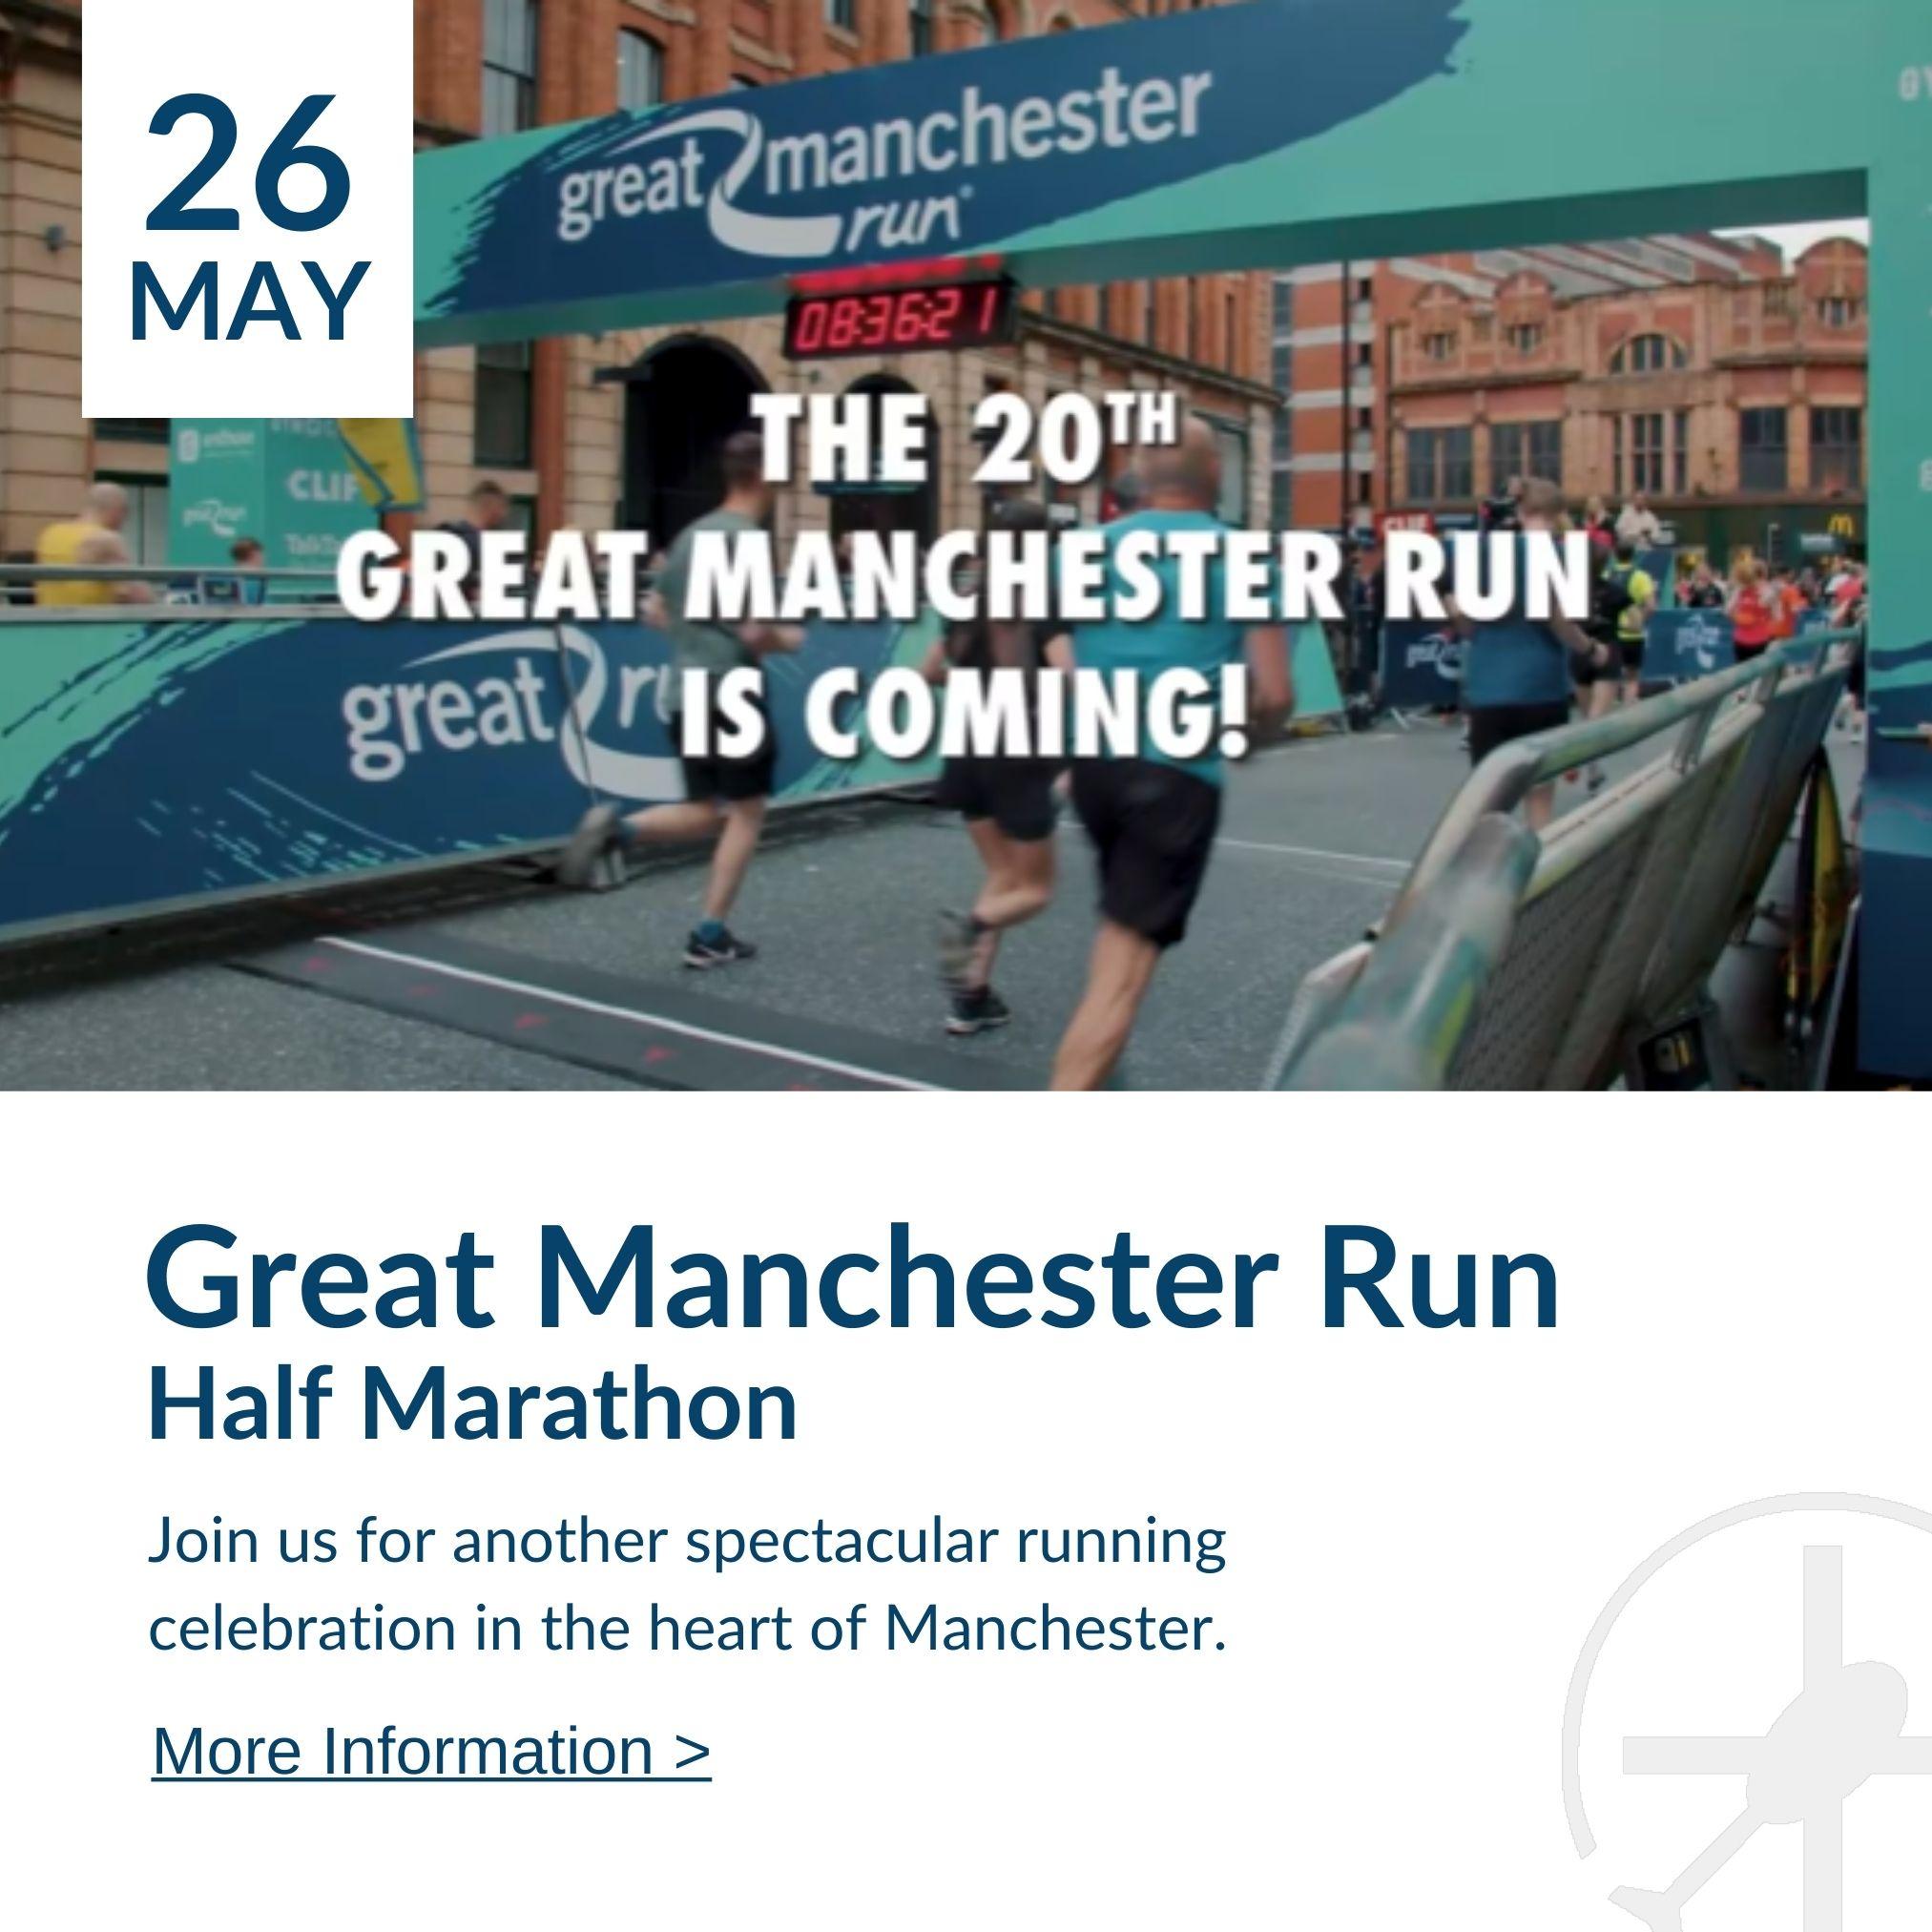 Events - Great Manchester Run